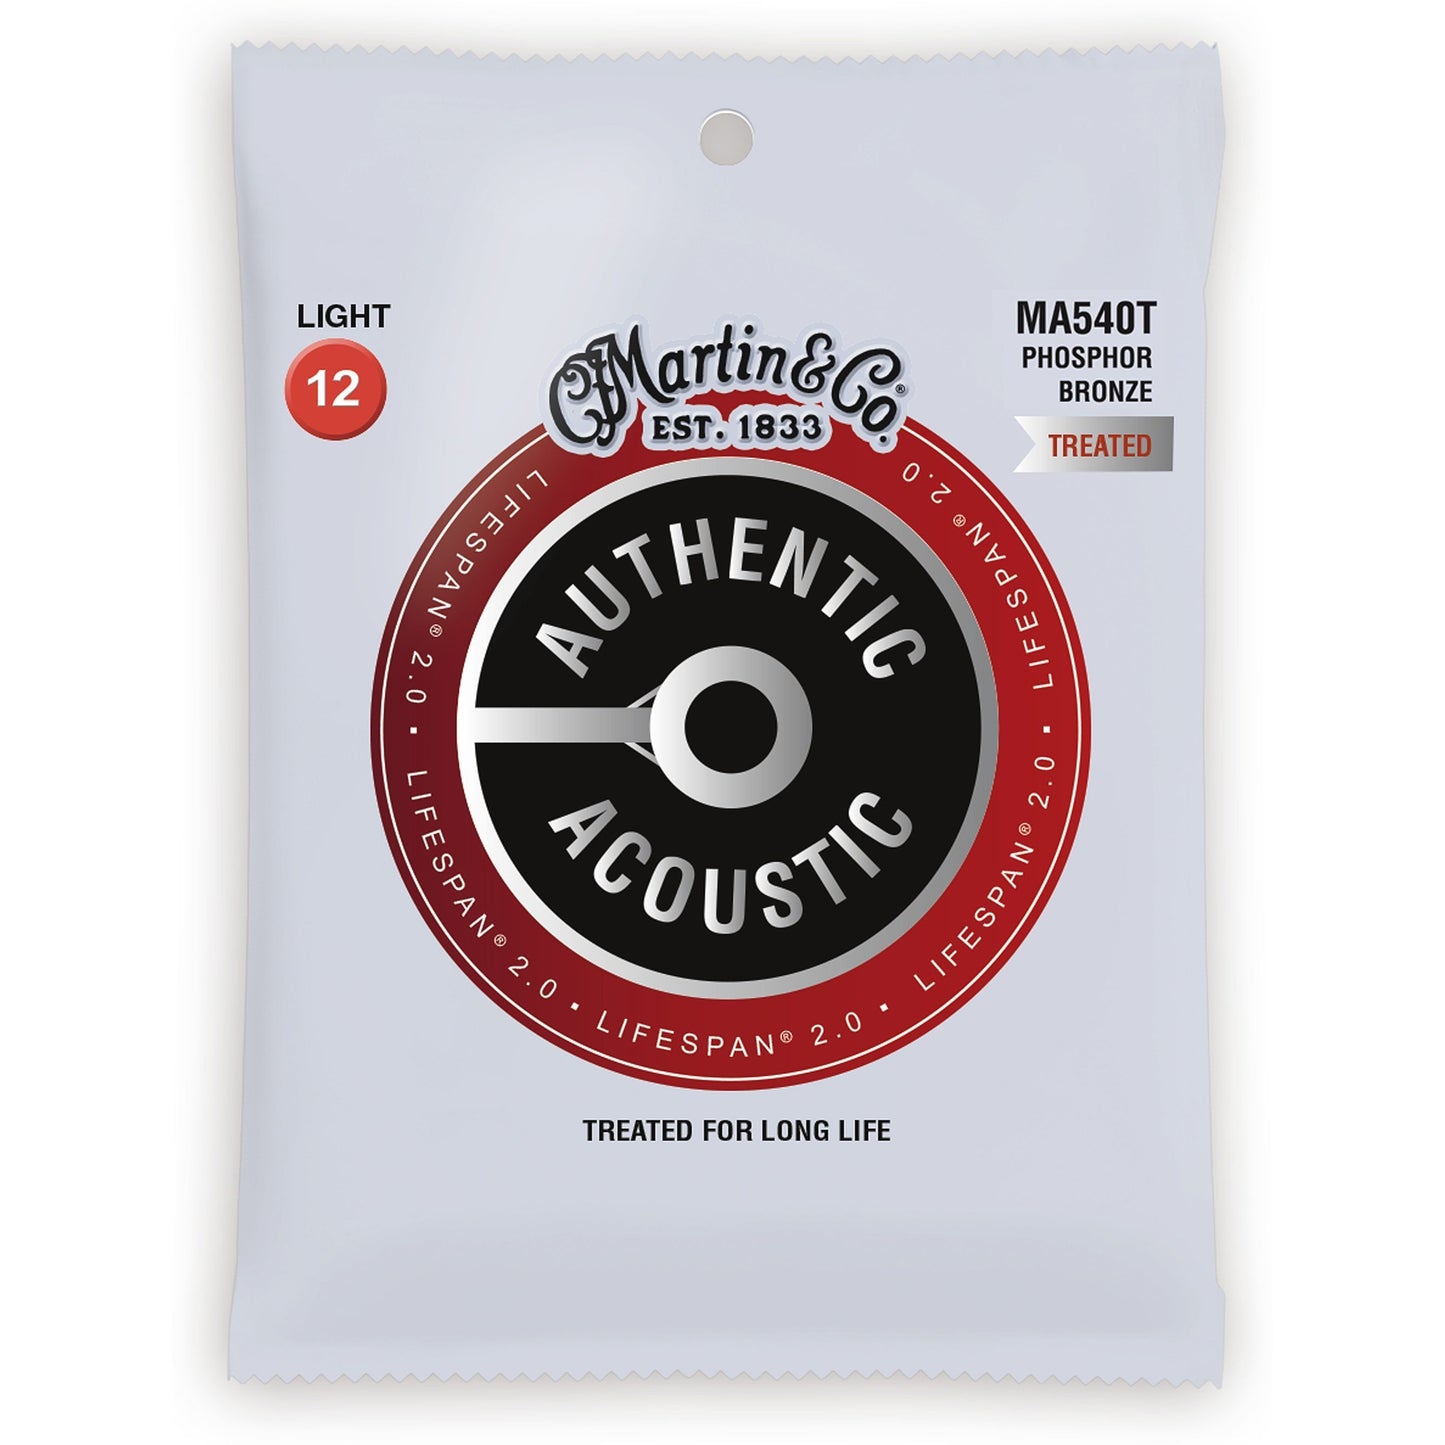 Martin Authentic Lifespan 2.0 Treated Phosphor Bronze Acoustic Guitar Strings, MA540T, Light